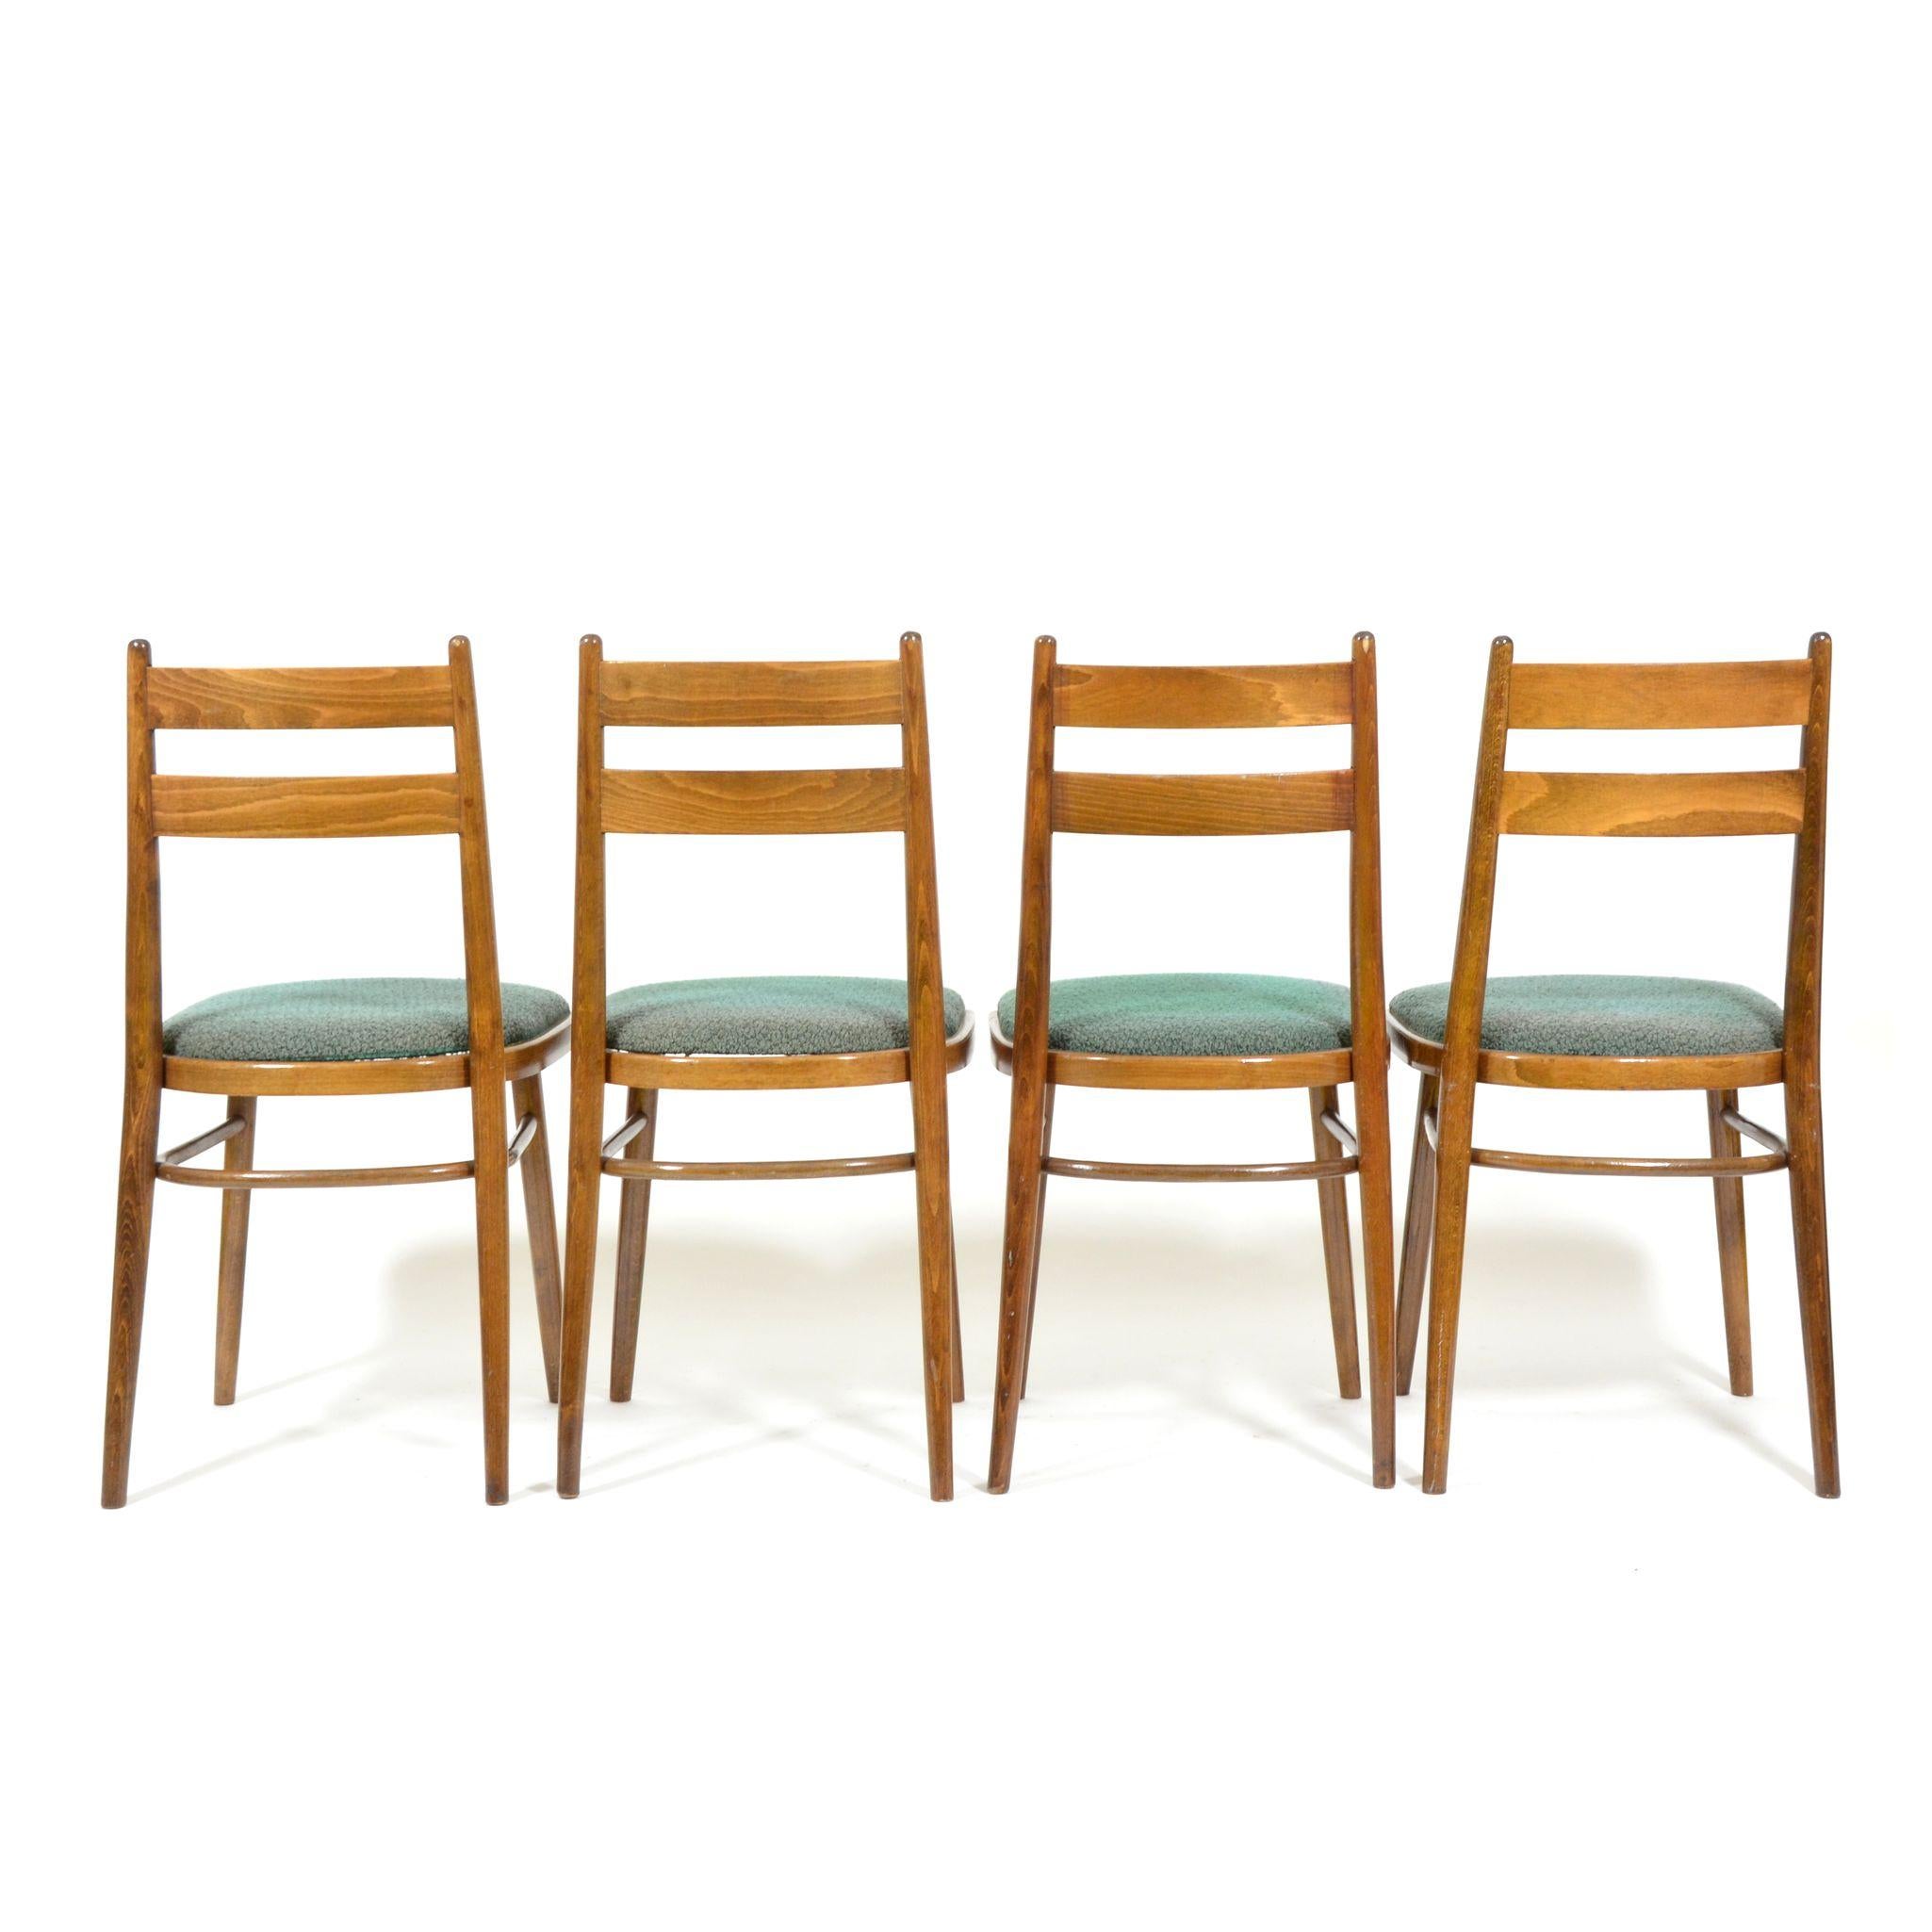 Set of Four Vintage Dining Chairs, Green Seats, Czechoslovakia, 1970s 1